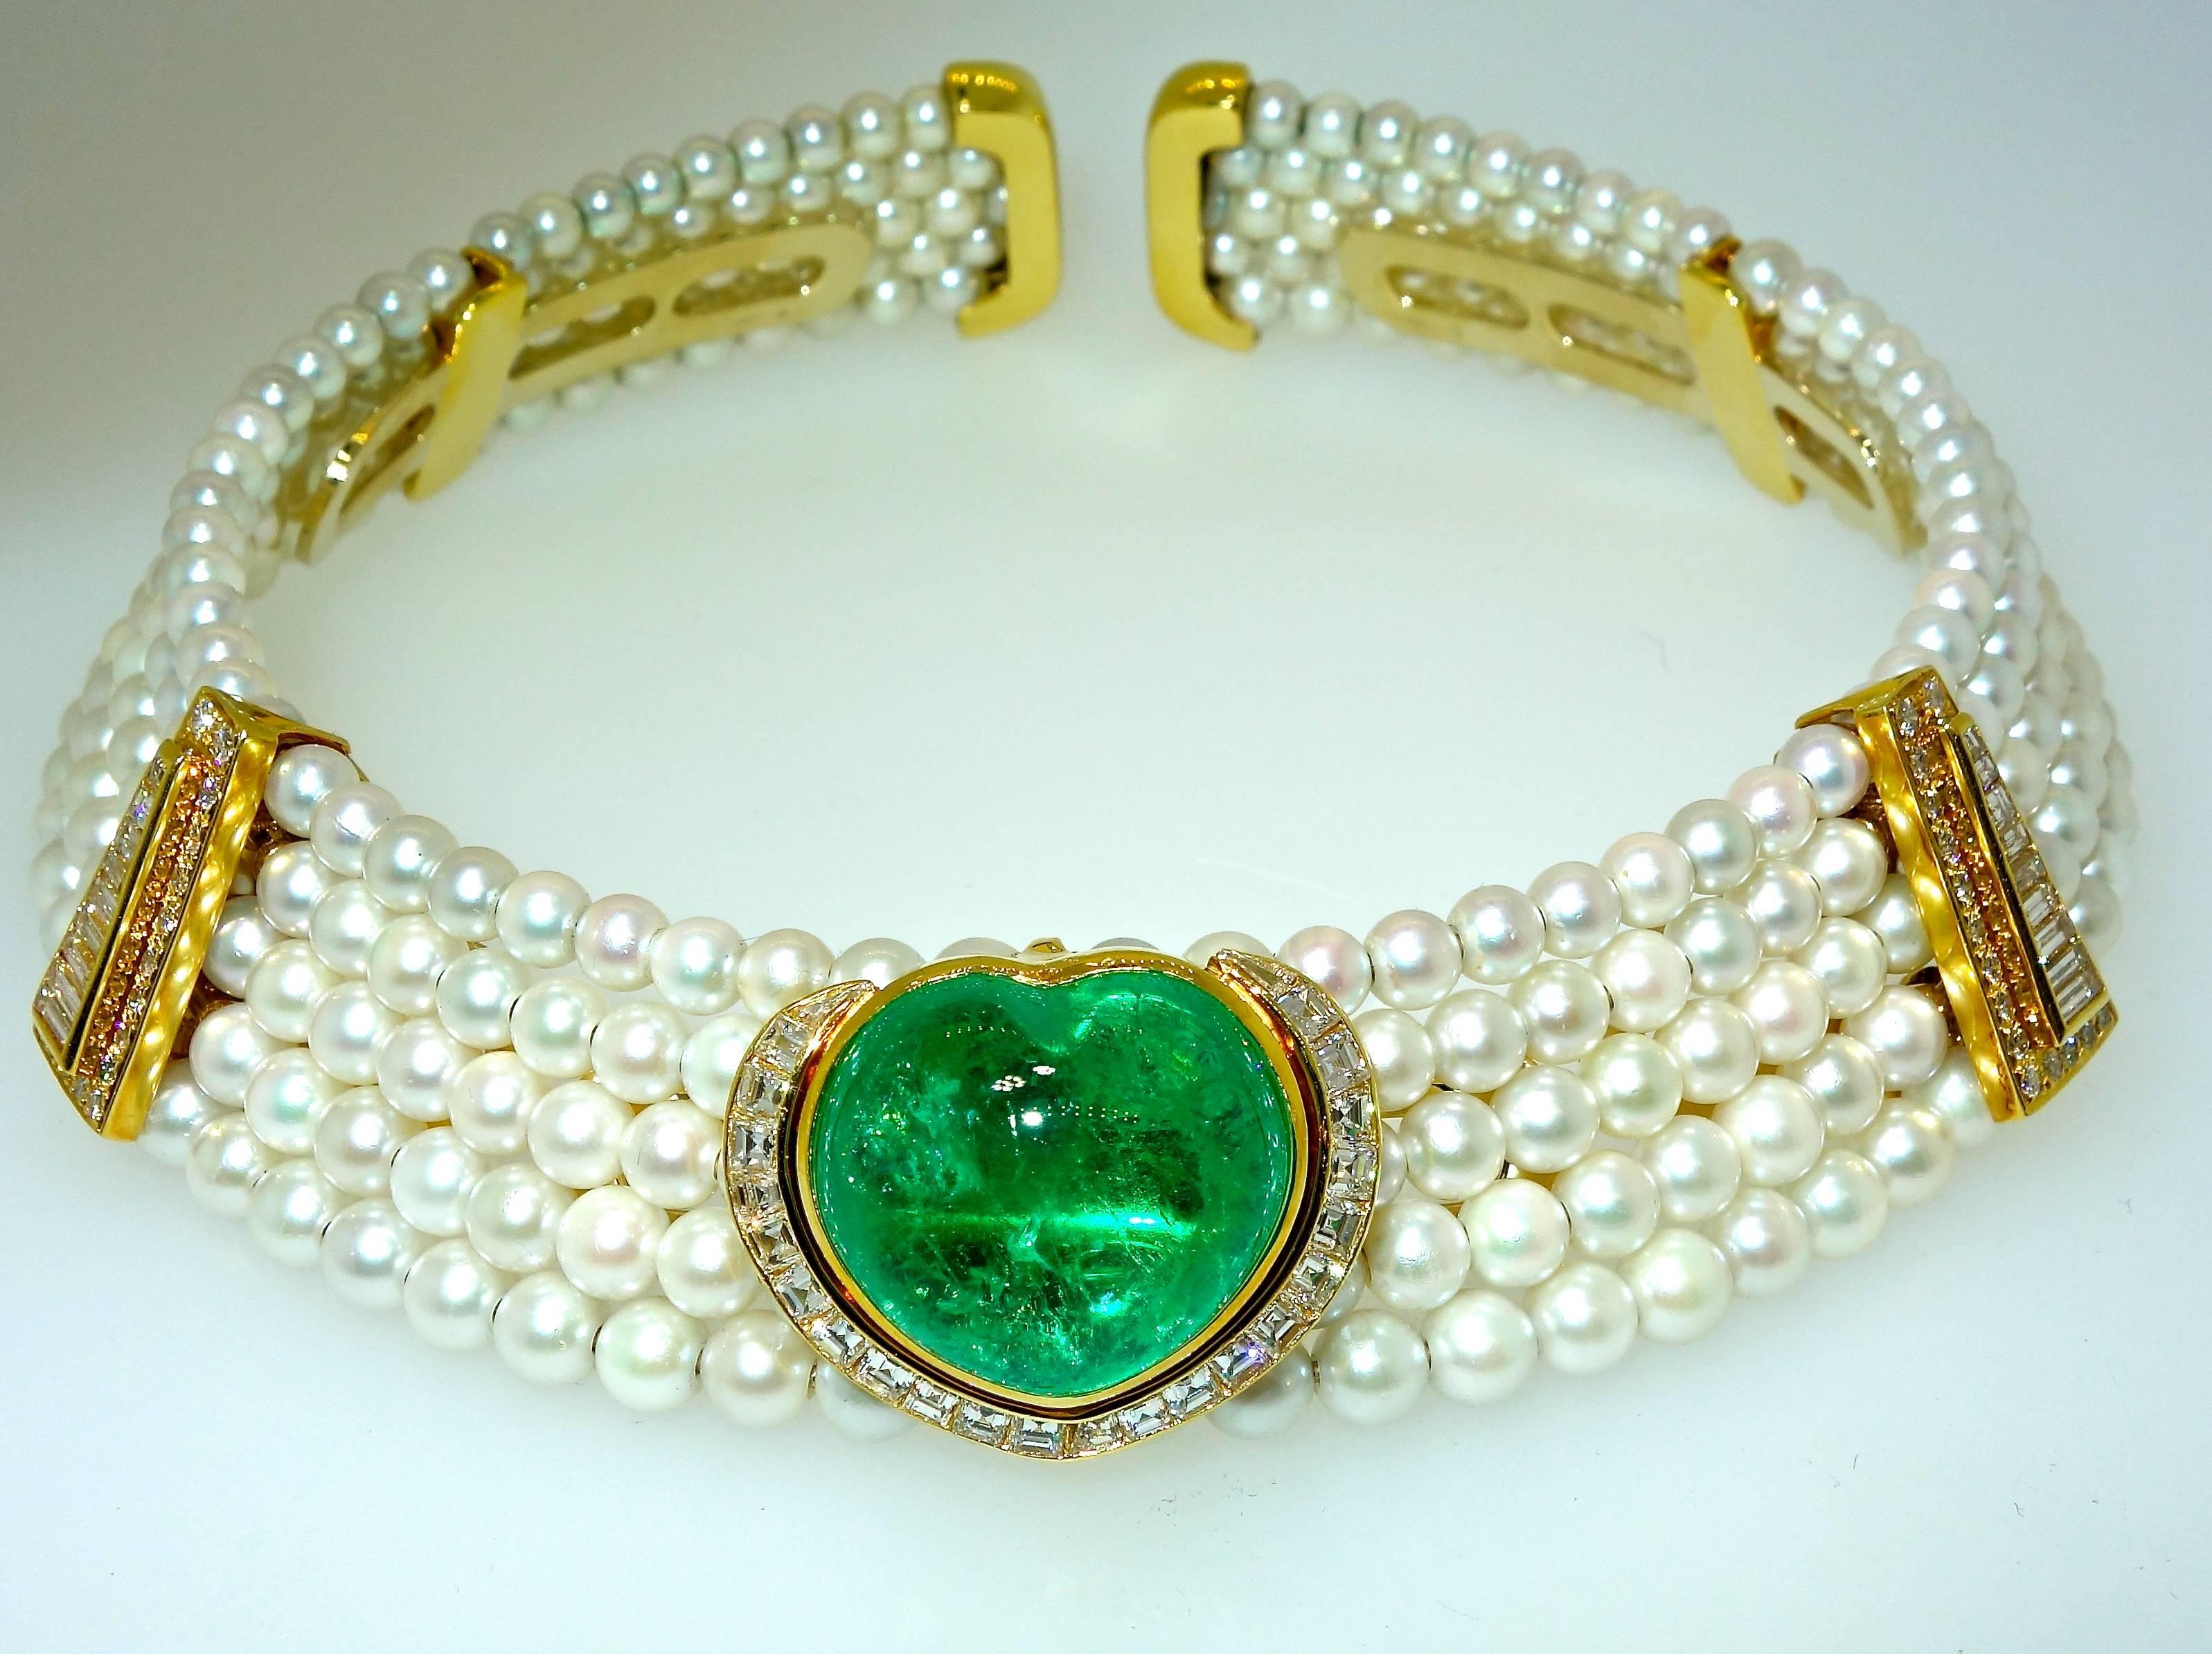 Modern Important Heart Shaped Emerald, Diamond and Pearl Choker Necklace